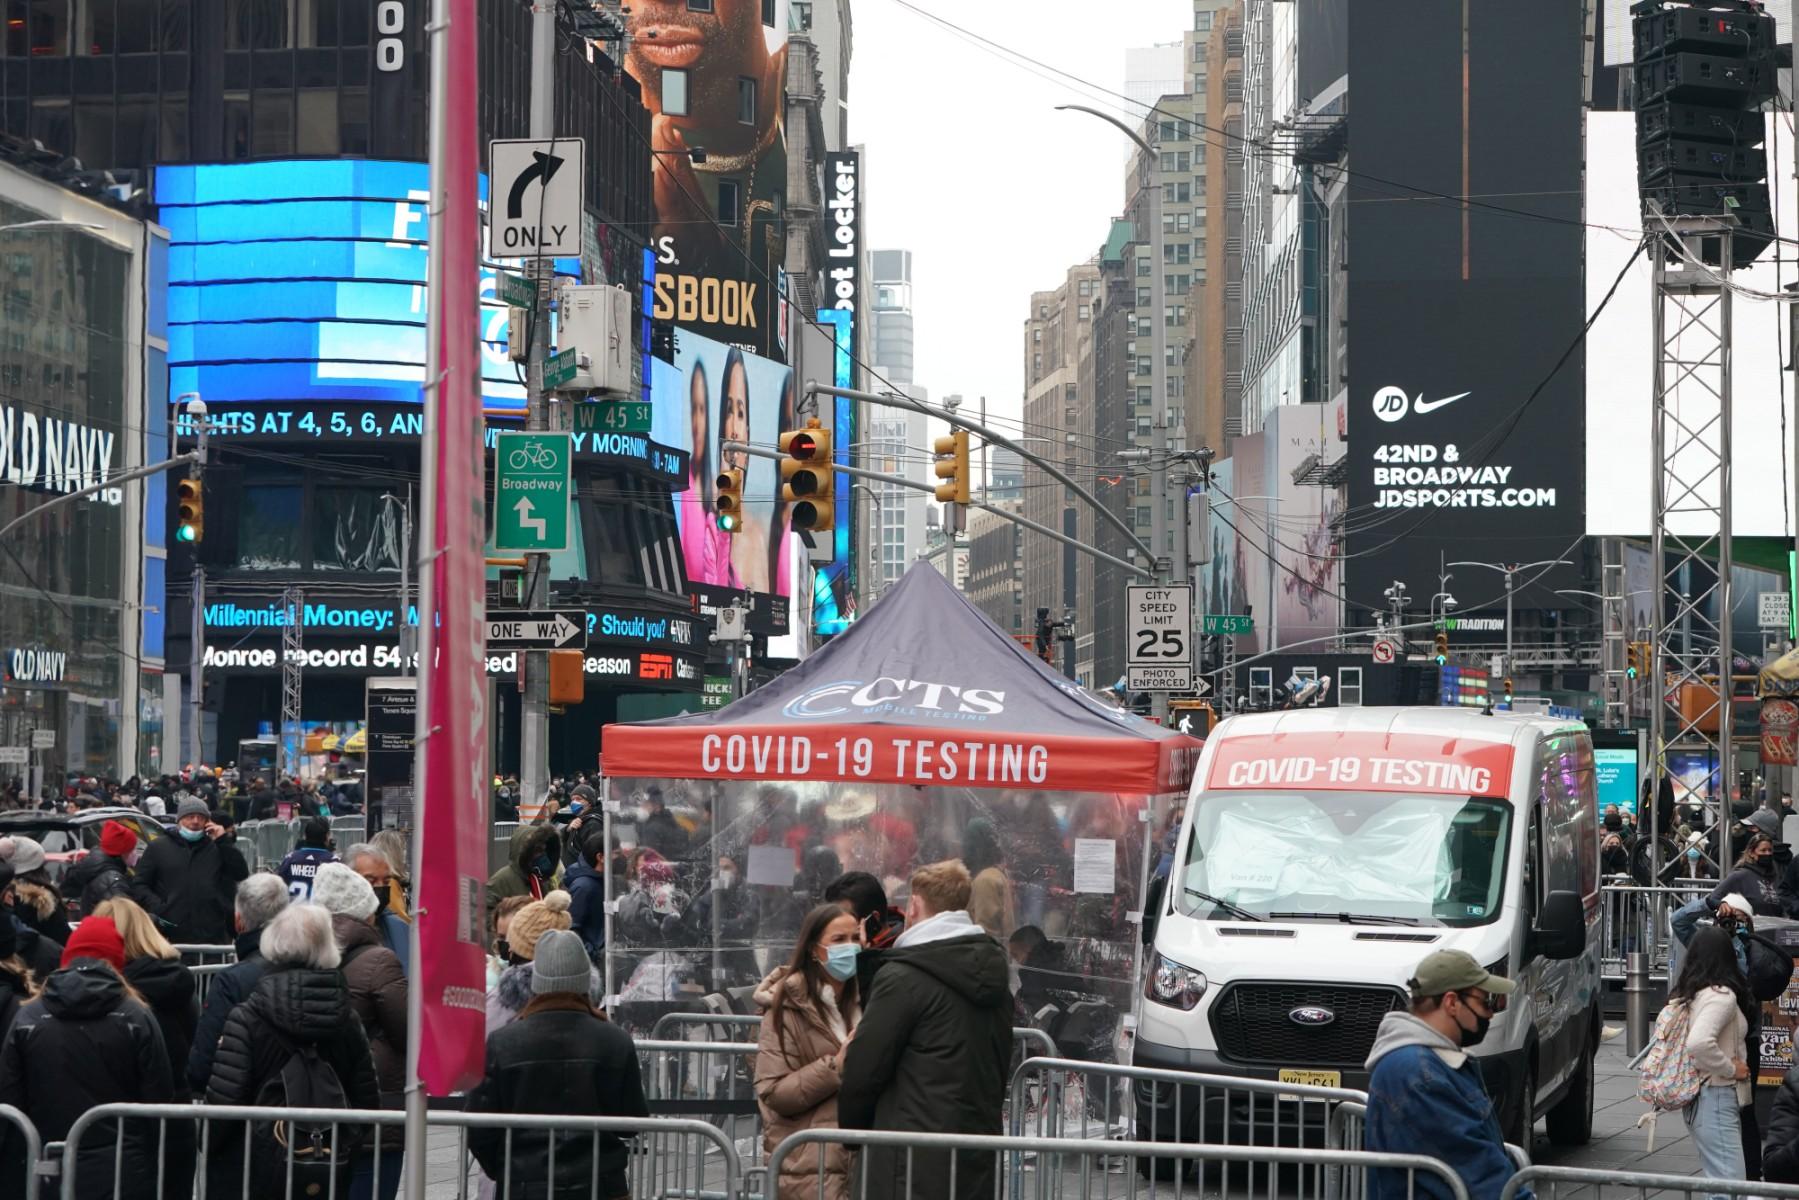 People stand in line for a Covid-19 test at a mobile testing site in Times Square on Dec 28 in New York. Photo: AFP